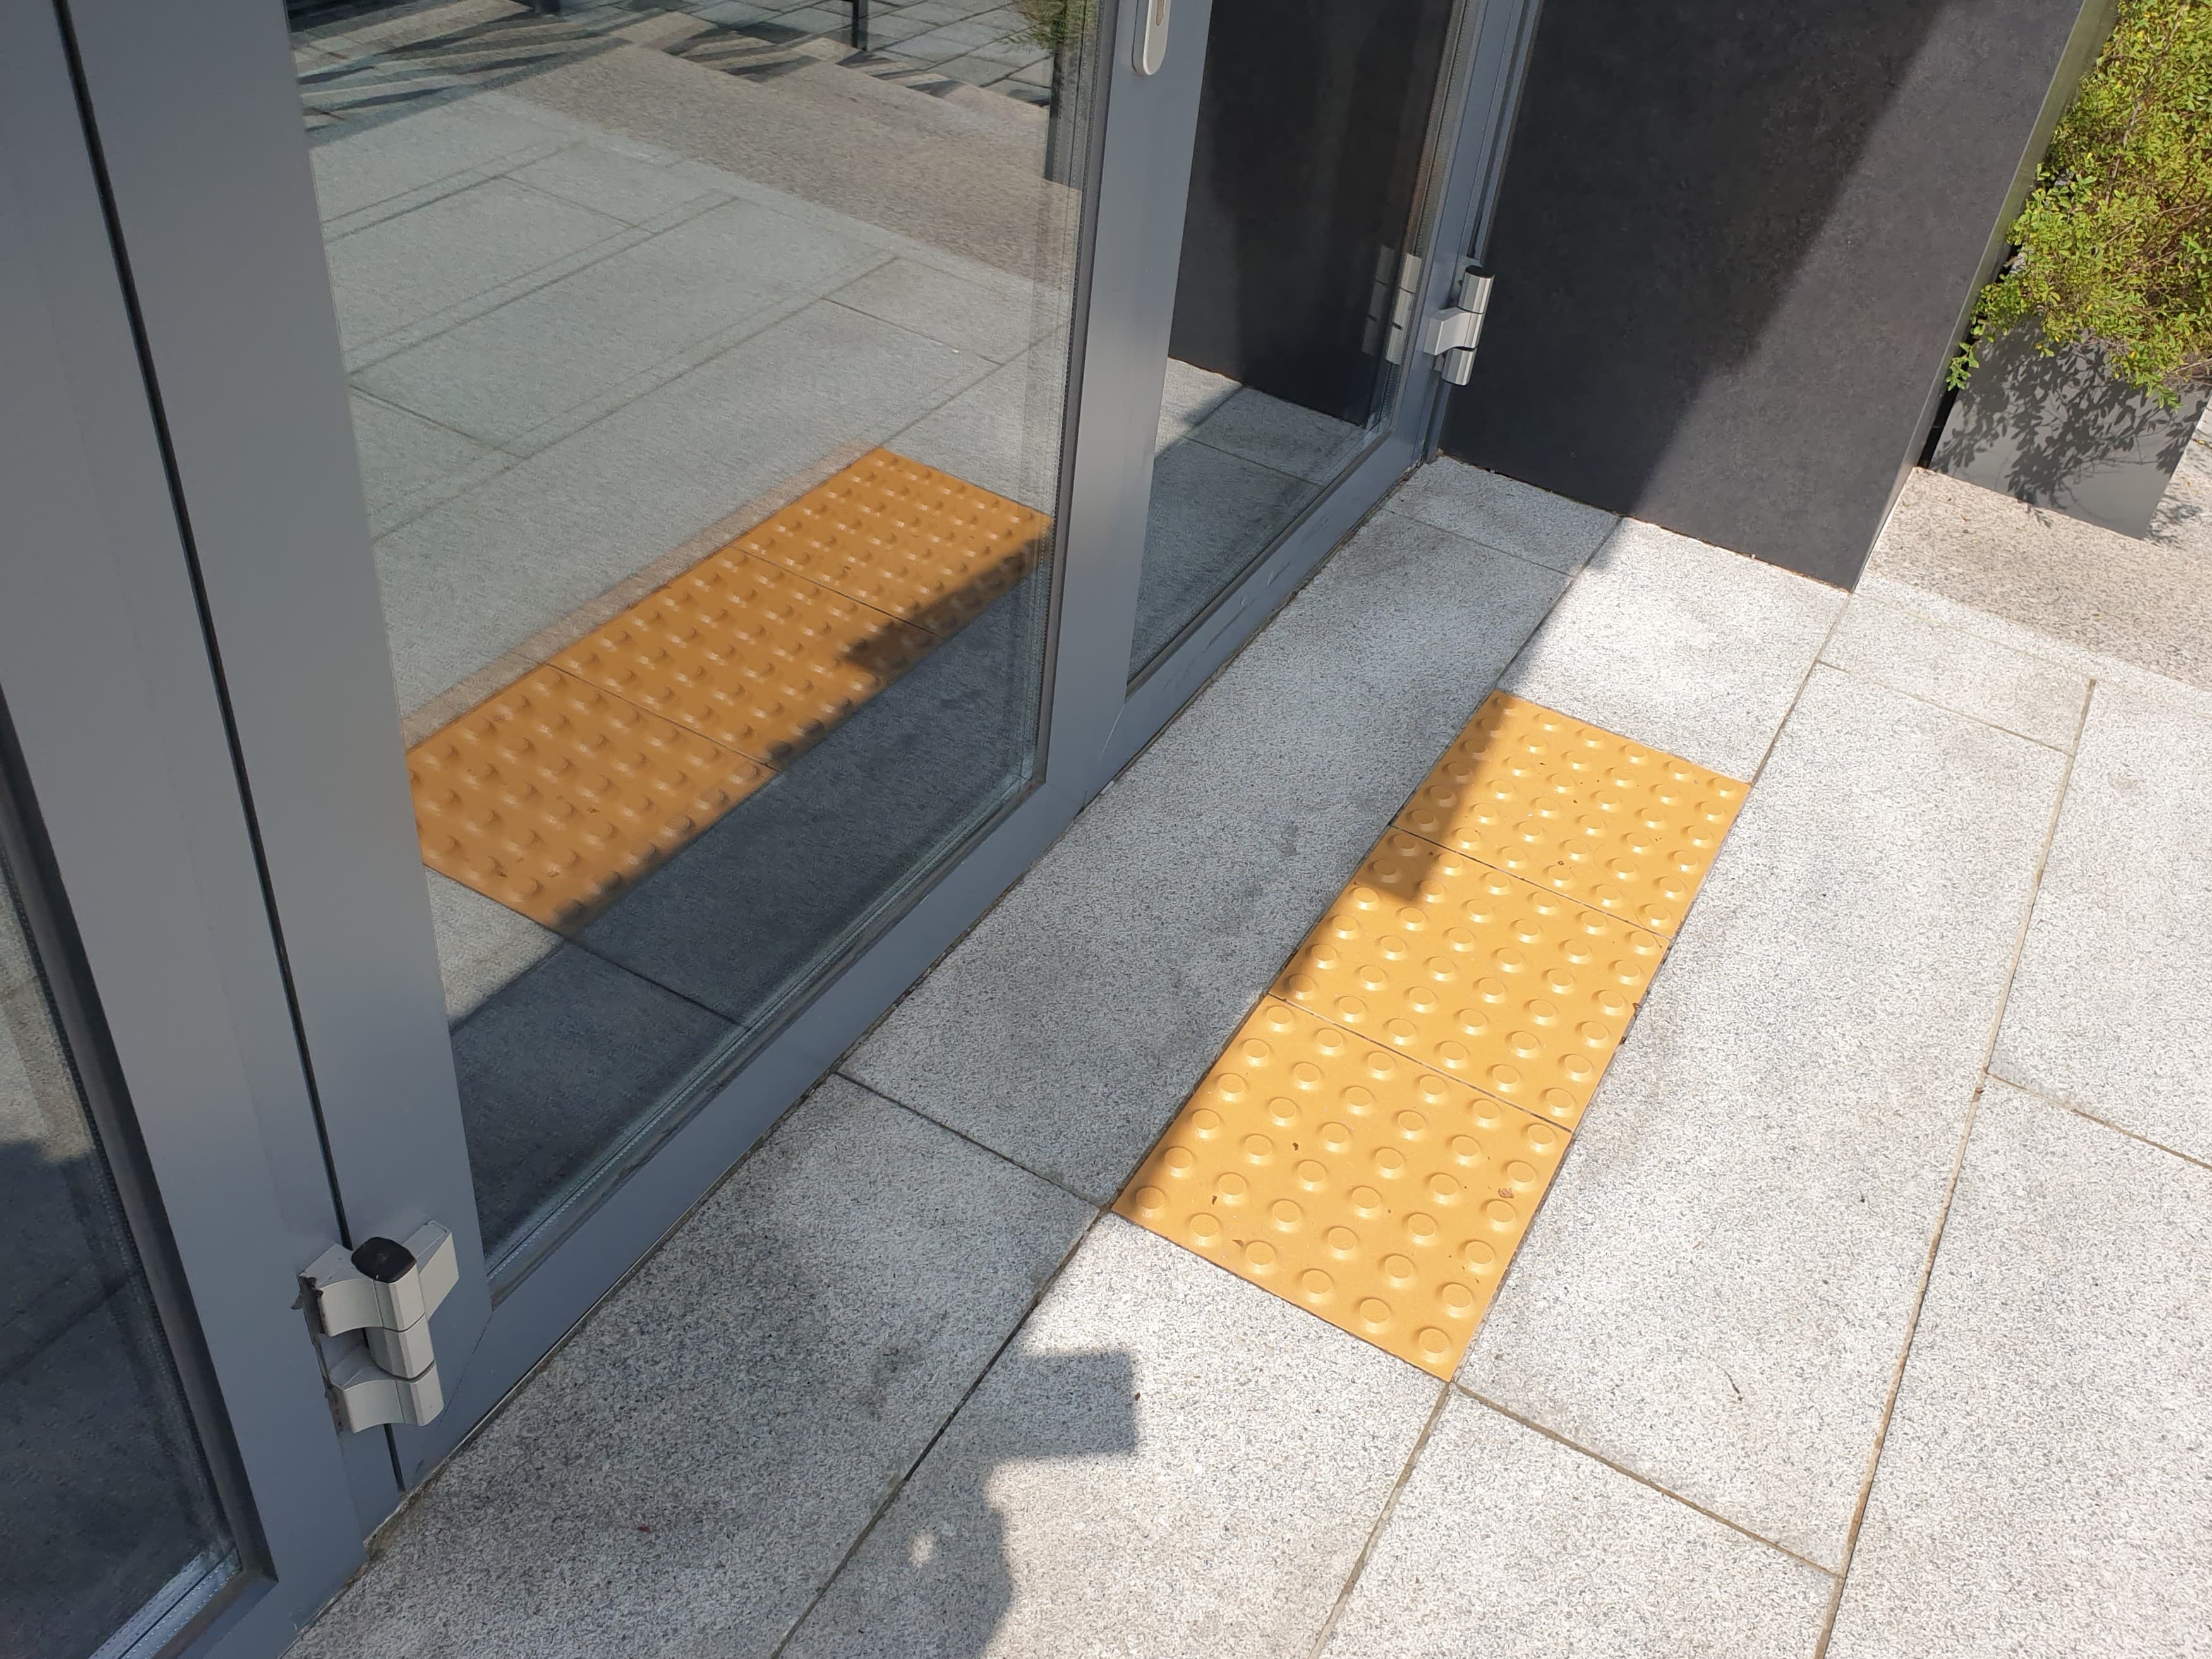 Entryway/ Main entrance0 : Tactile pavings installed in front of the main entrance